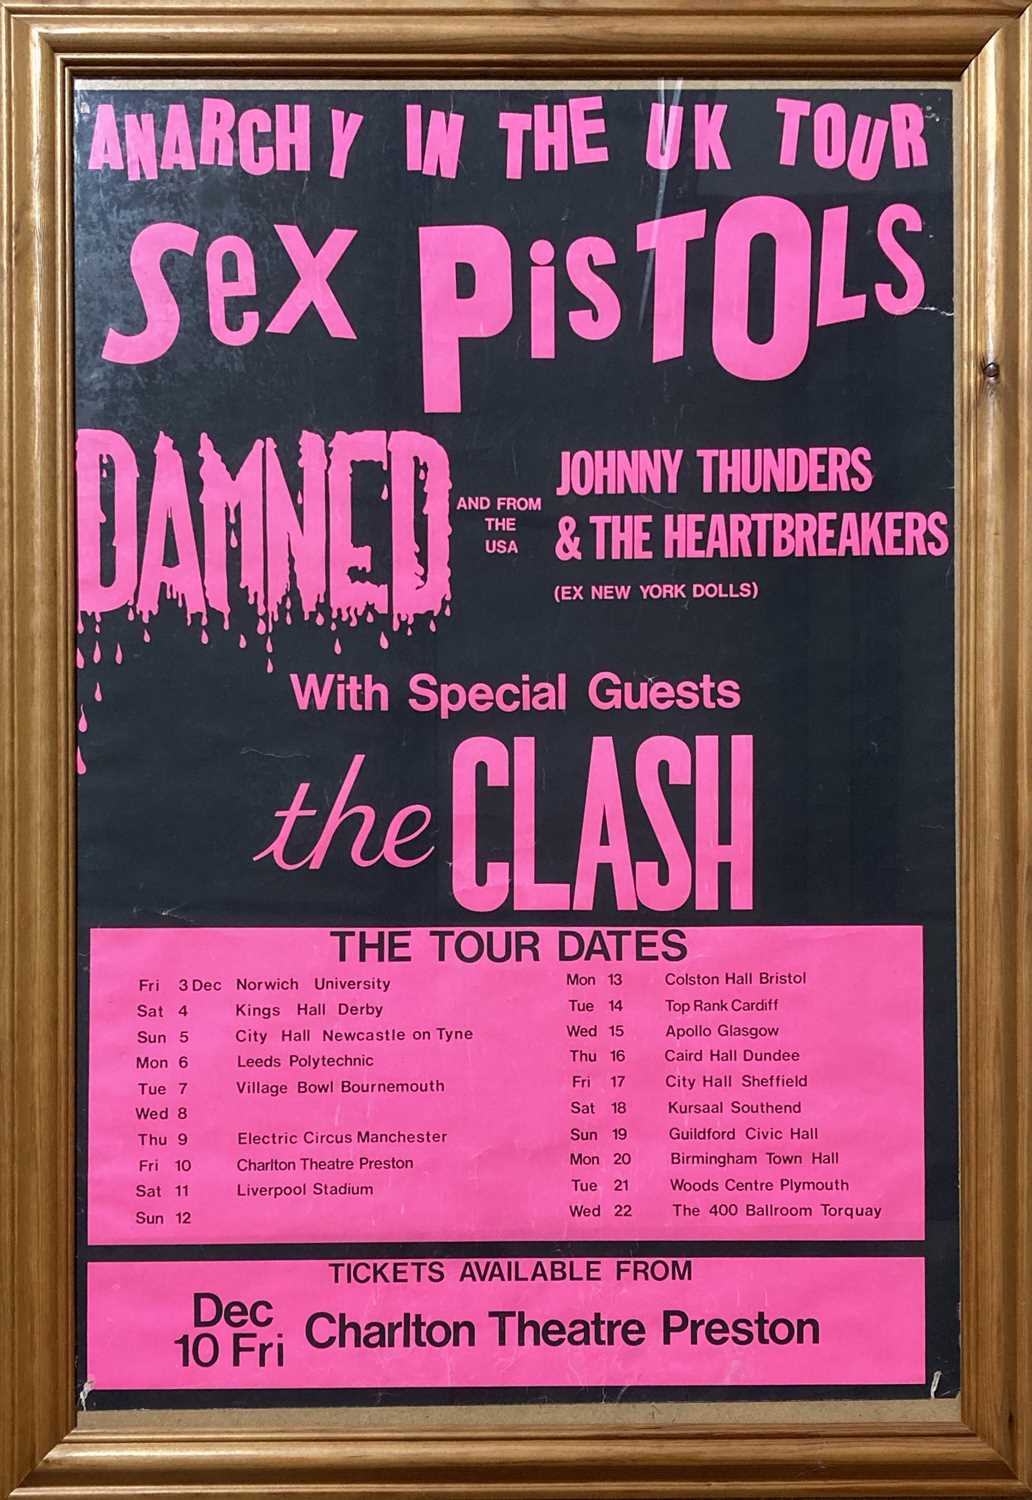 Lot 213 - SEX PISTOLS ANARCHY IN THE UK TOUR POSTER - PRESTON.